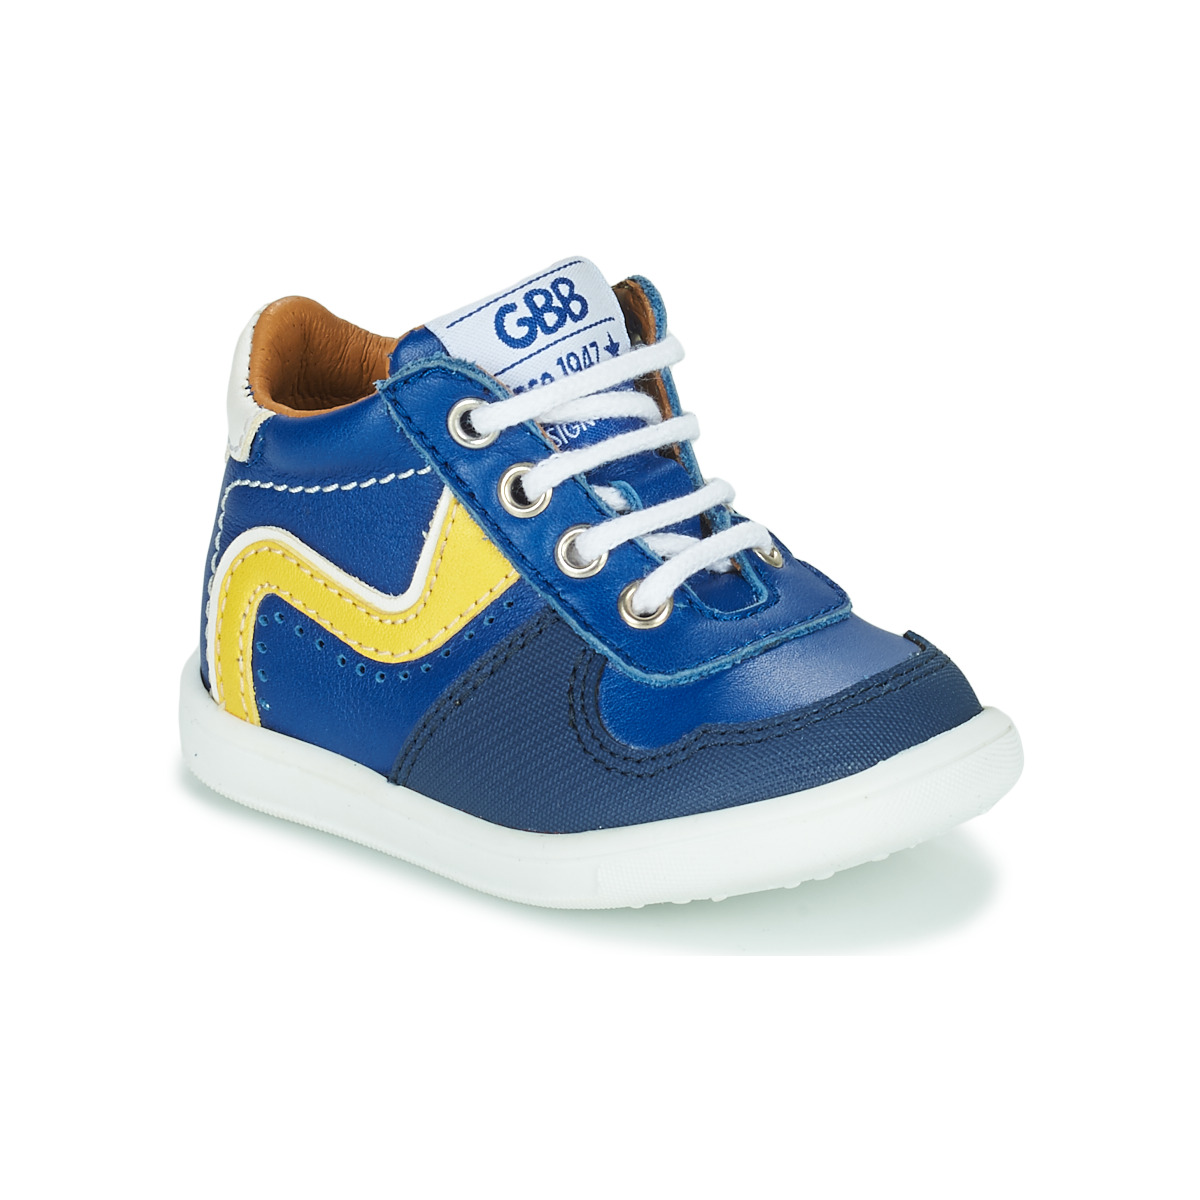 Shoes Boy High top trainers GBB GINO Blue